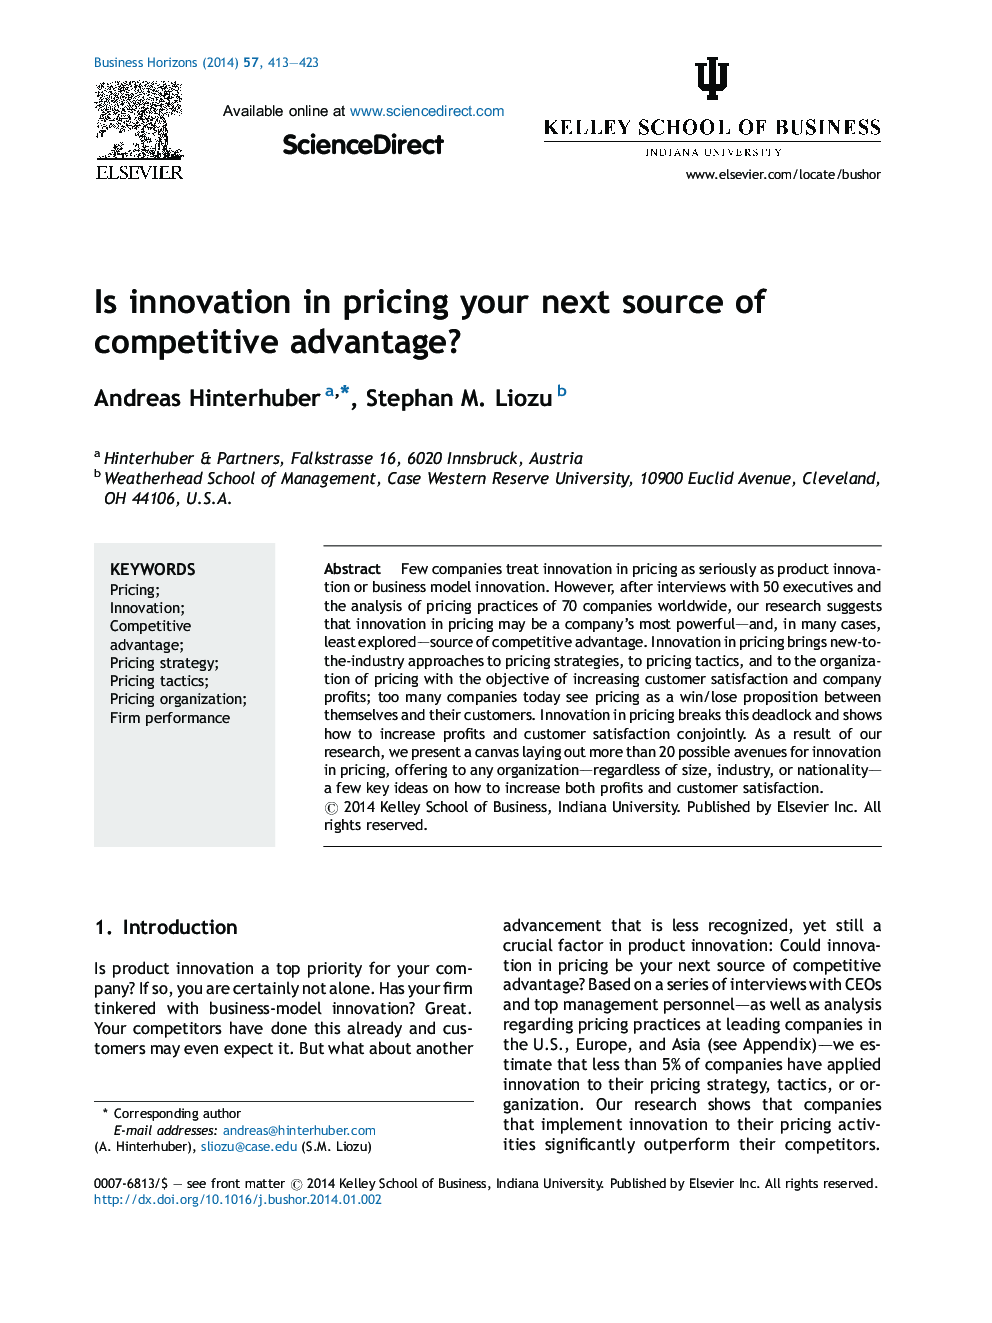 Is innovation in pricing your next source of competitive advantage?